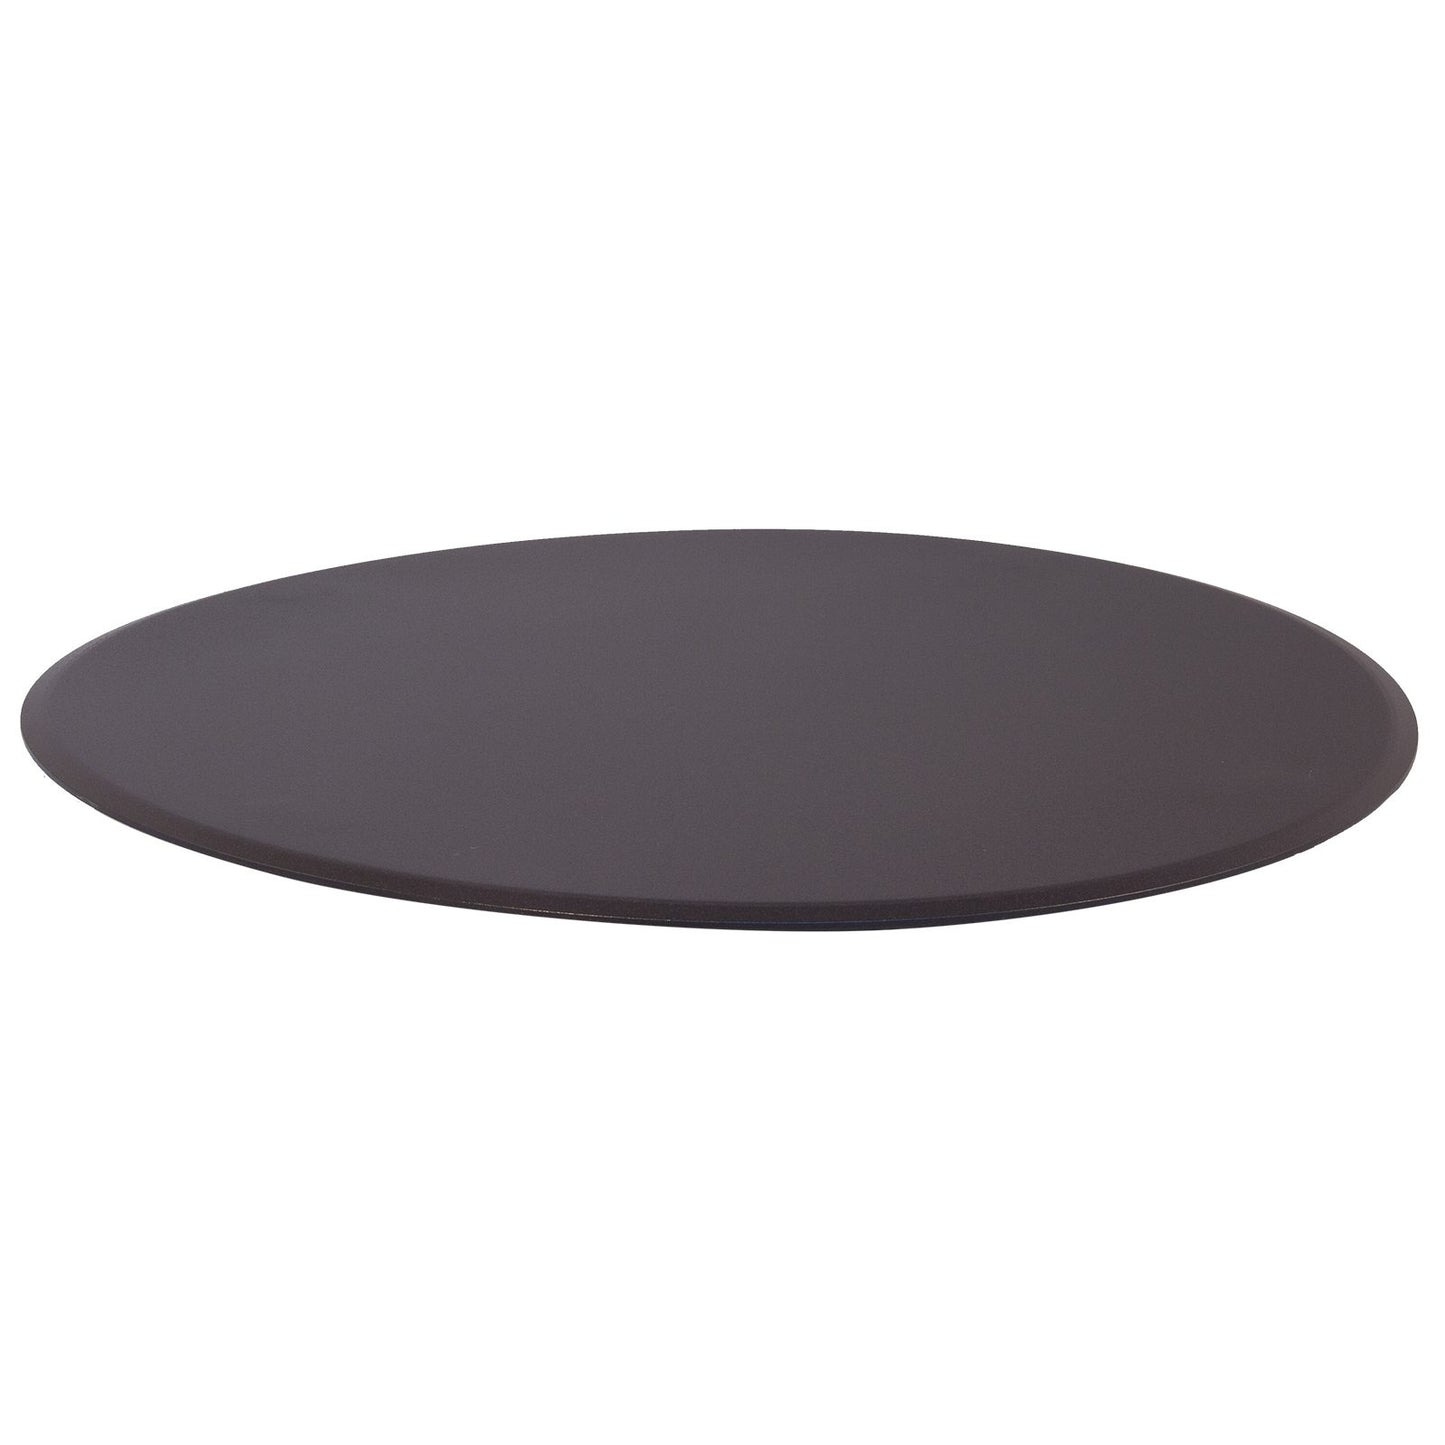 OW Lee 5484-20RD 20" Round Fire Pit Cover